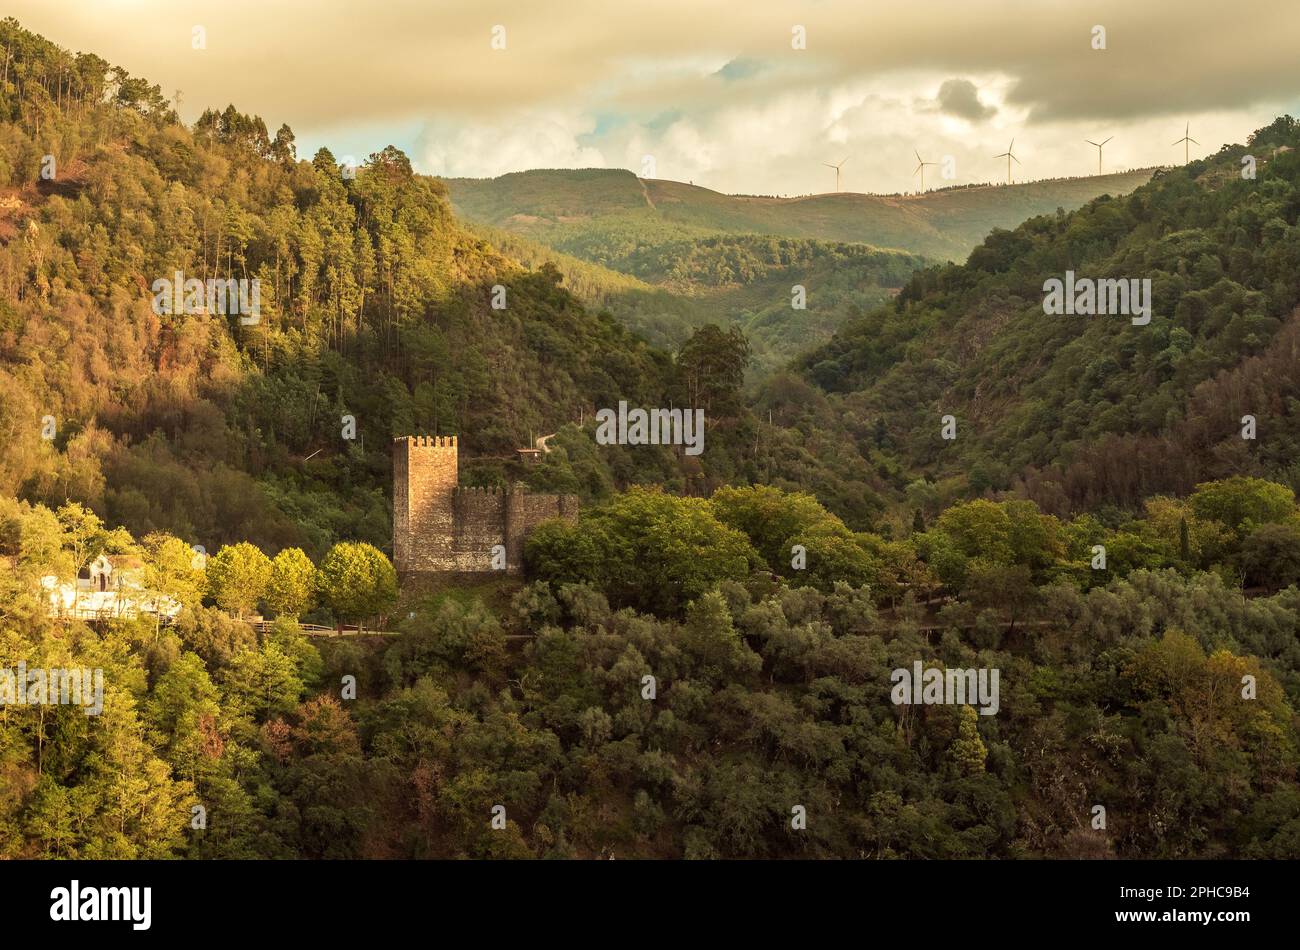 Lousã Castle in Portugal, with the Lousã mountains in the background. Stock Photo